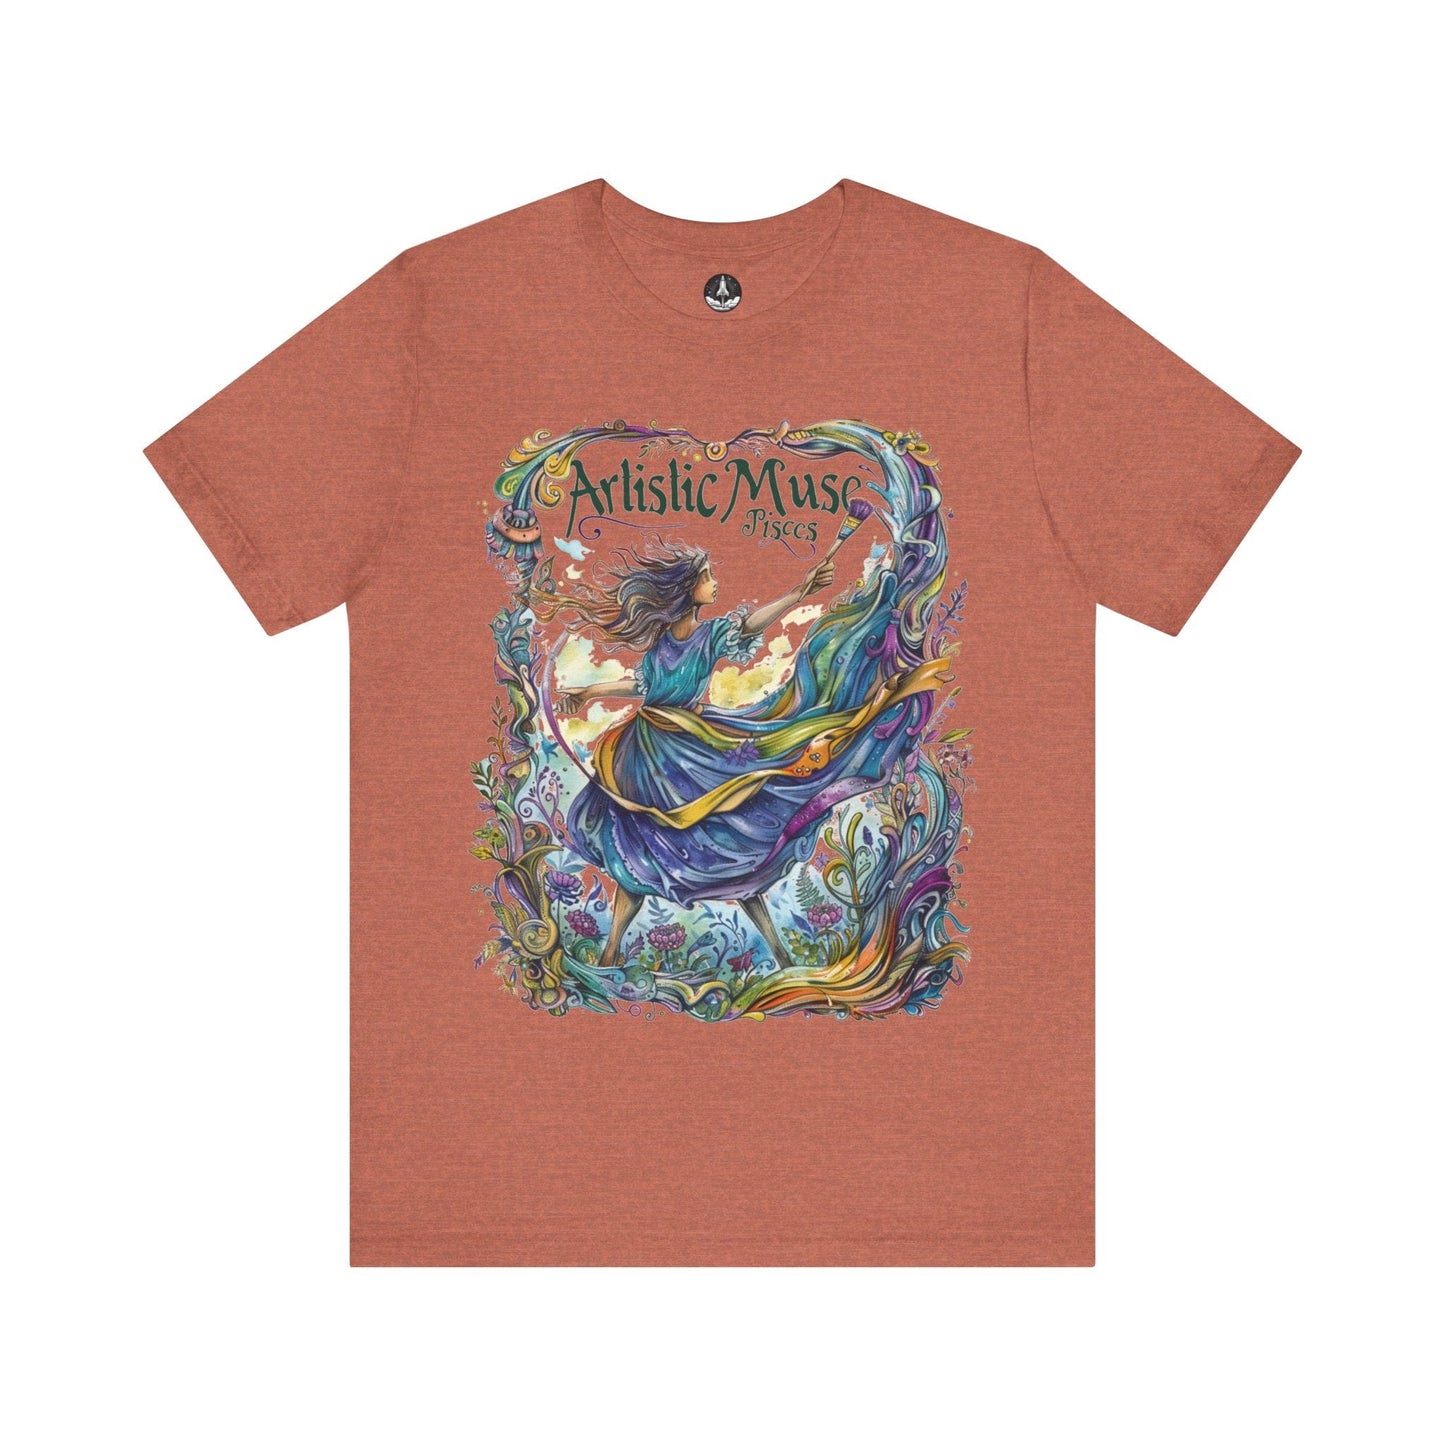 T-Shirt Heather Clay / S Artistic Muse Pisces T-Shirt